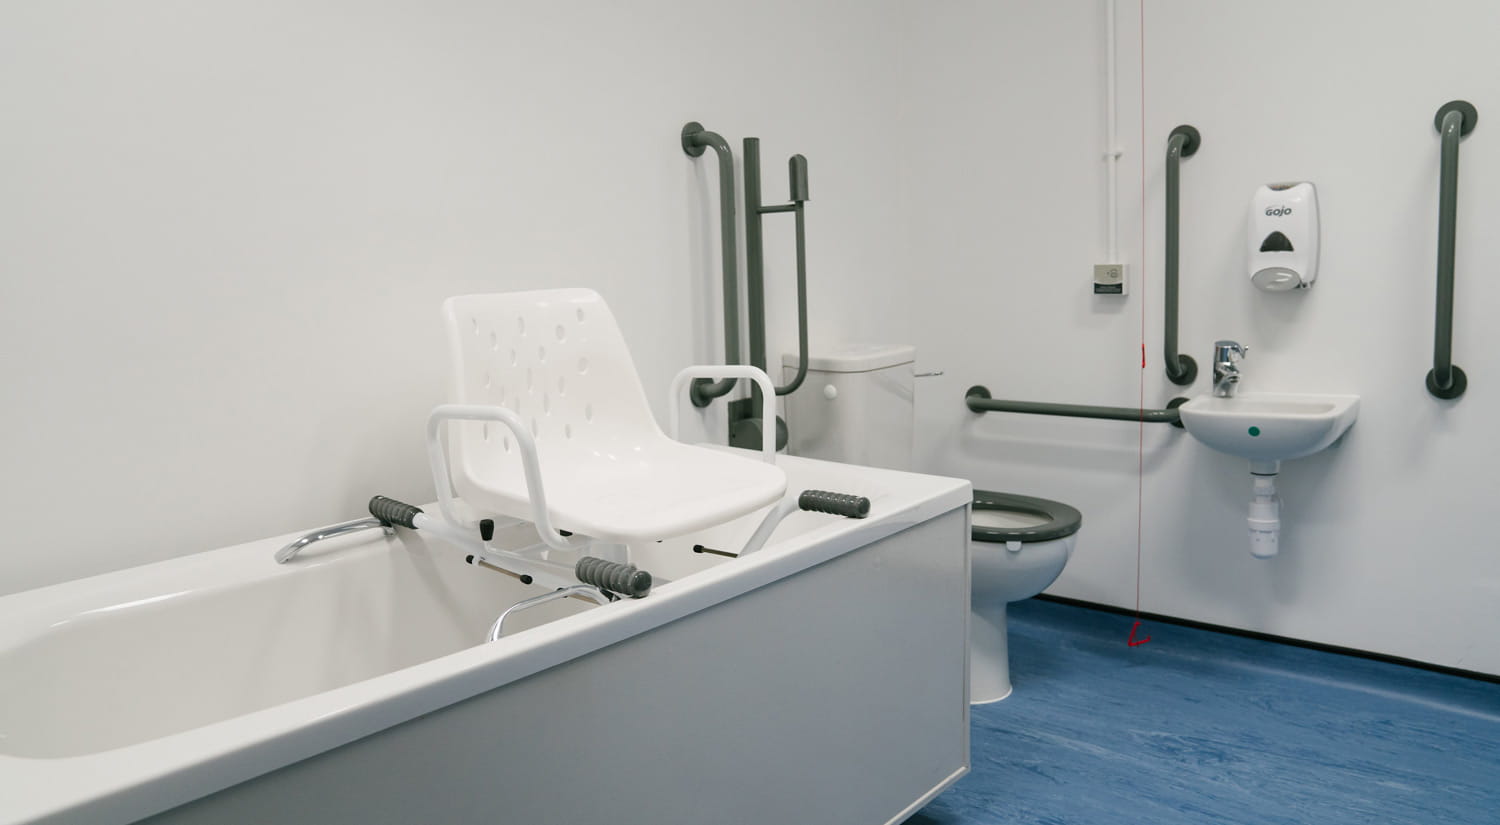 An adapted bathroom where students can practice moving and handling skills